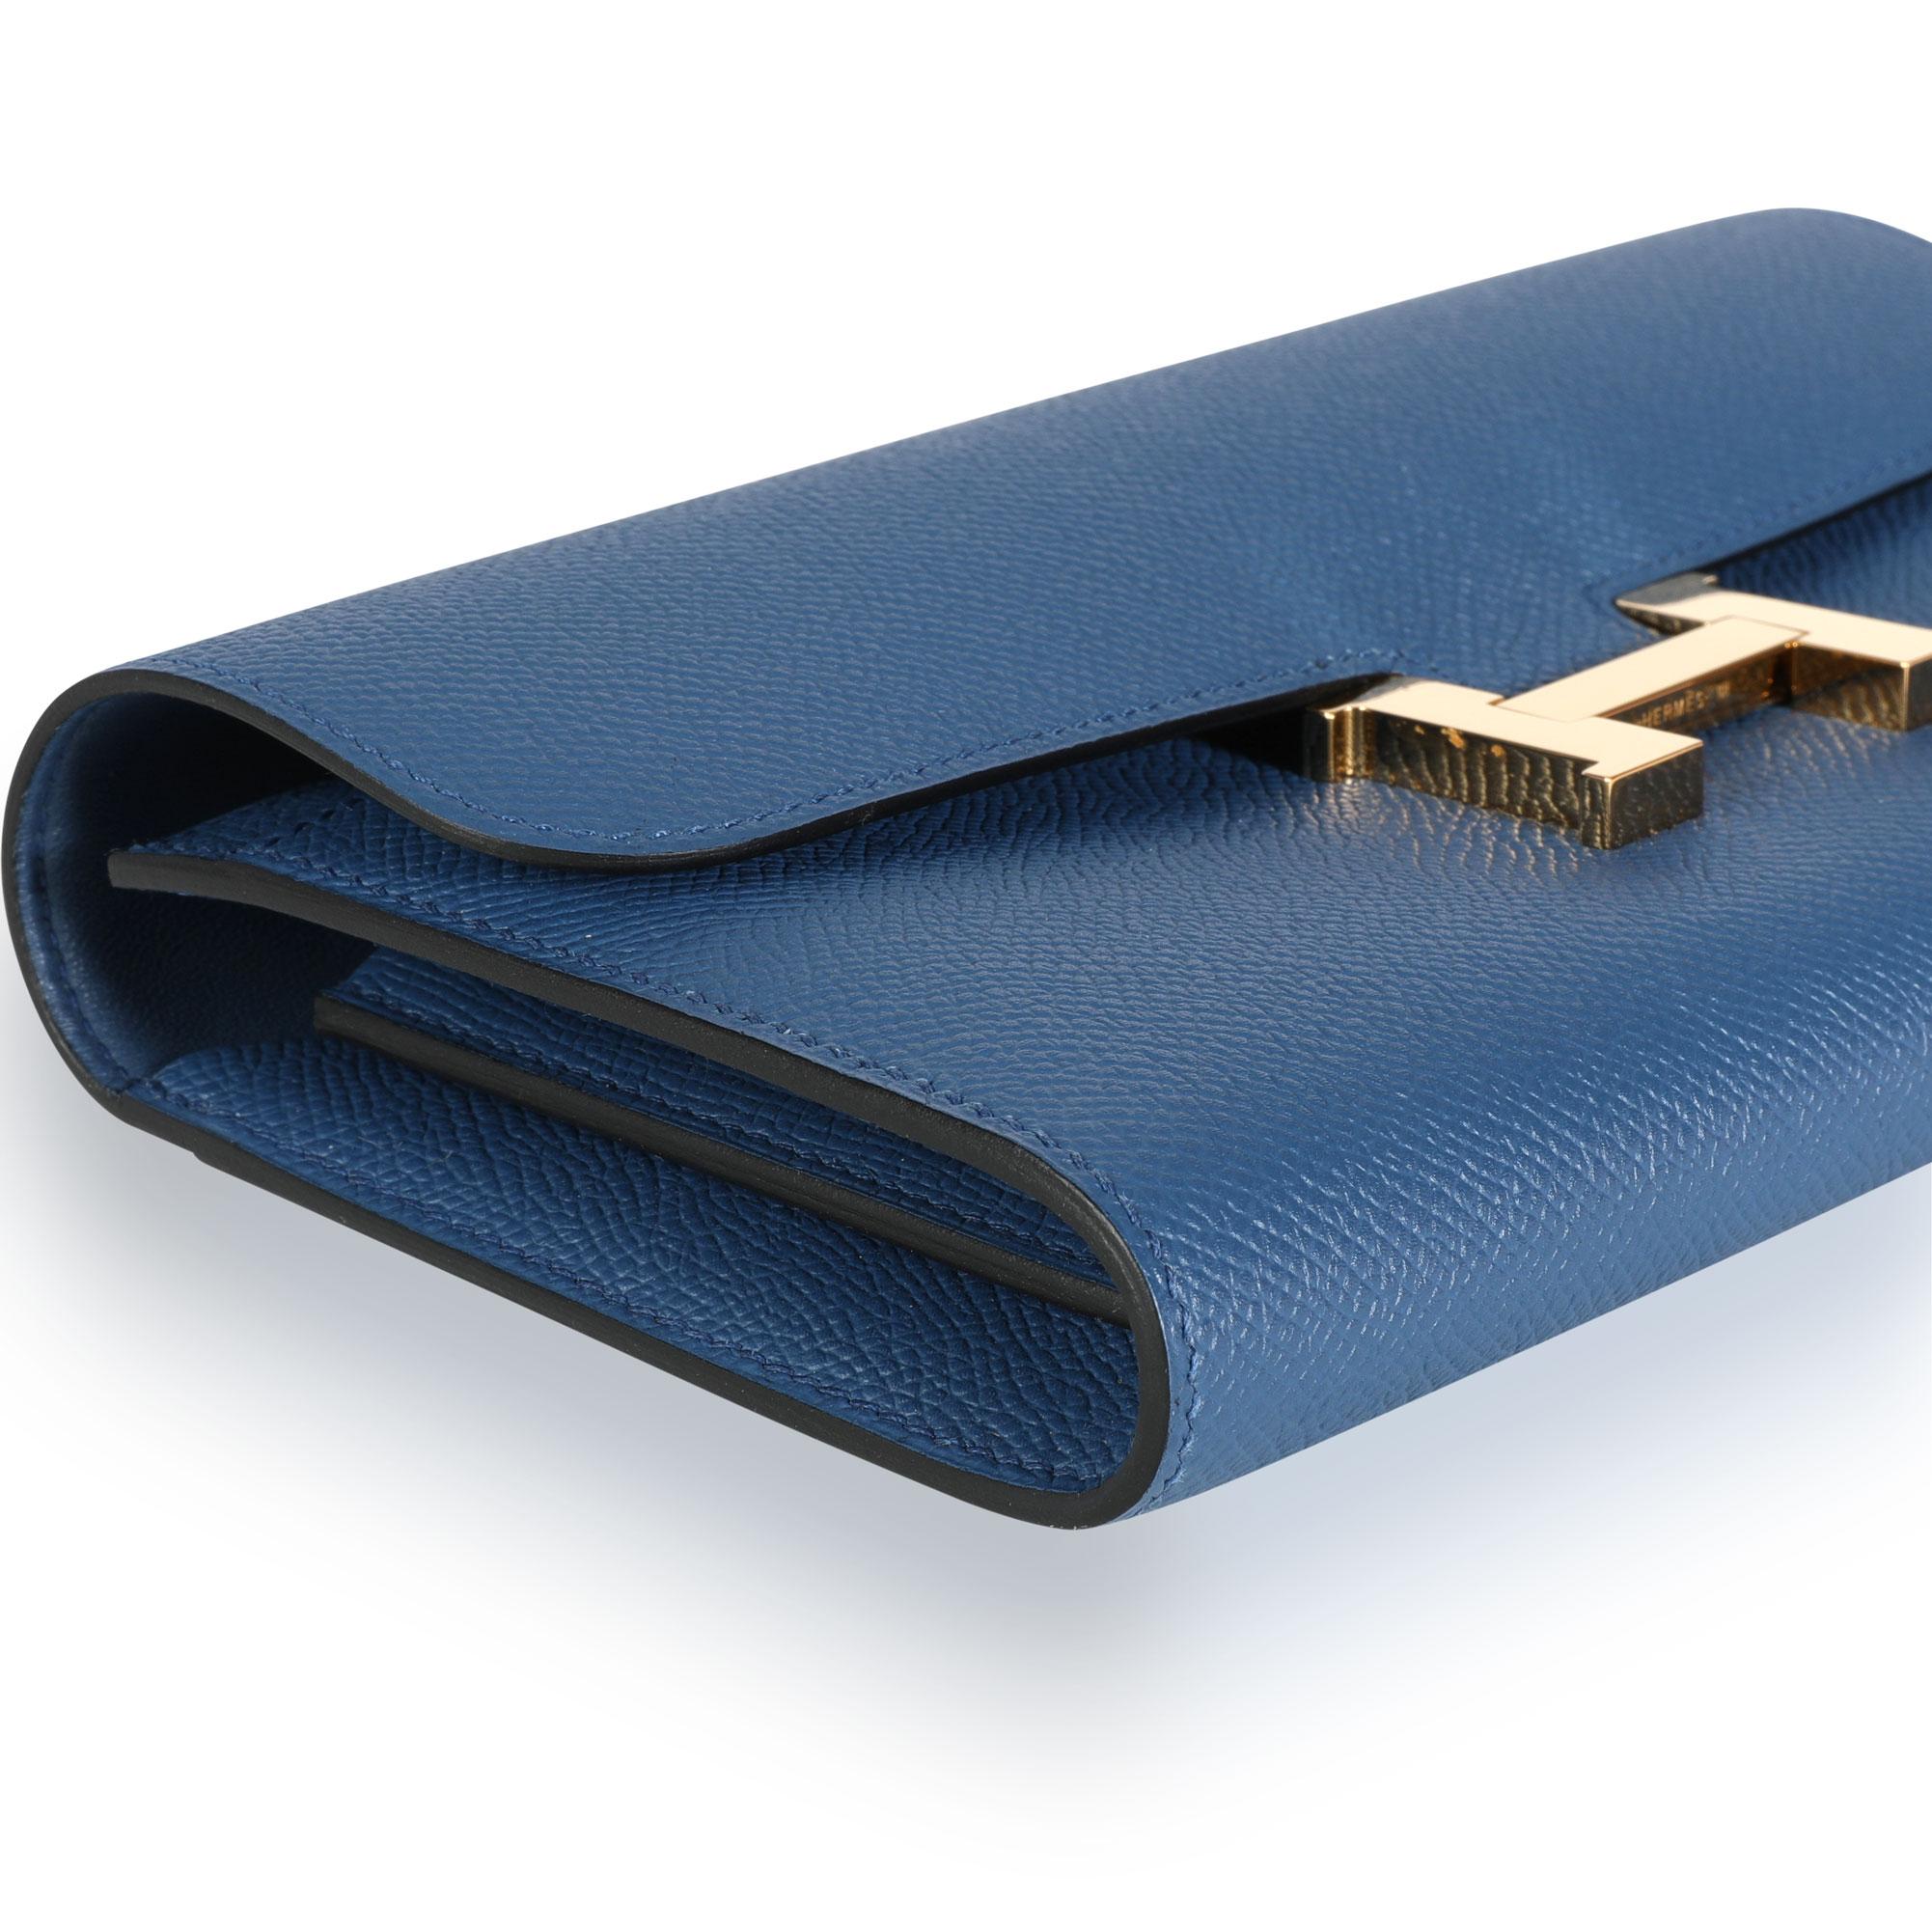   Hermès Bleu Brighton Epsom Constance Long Wallet PHW
SKU: 110962
MSRP:  
Condition: Pre-owned (3000)
Condition Description: 
Handbag Condition: Very Good
Condition Comments: Very Good Condition. Scratching and tarnishing to hardware.
Brand: